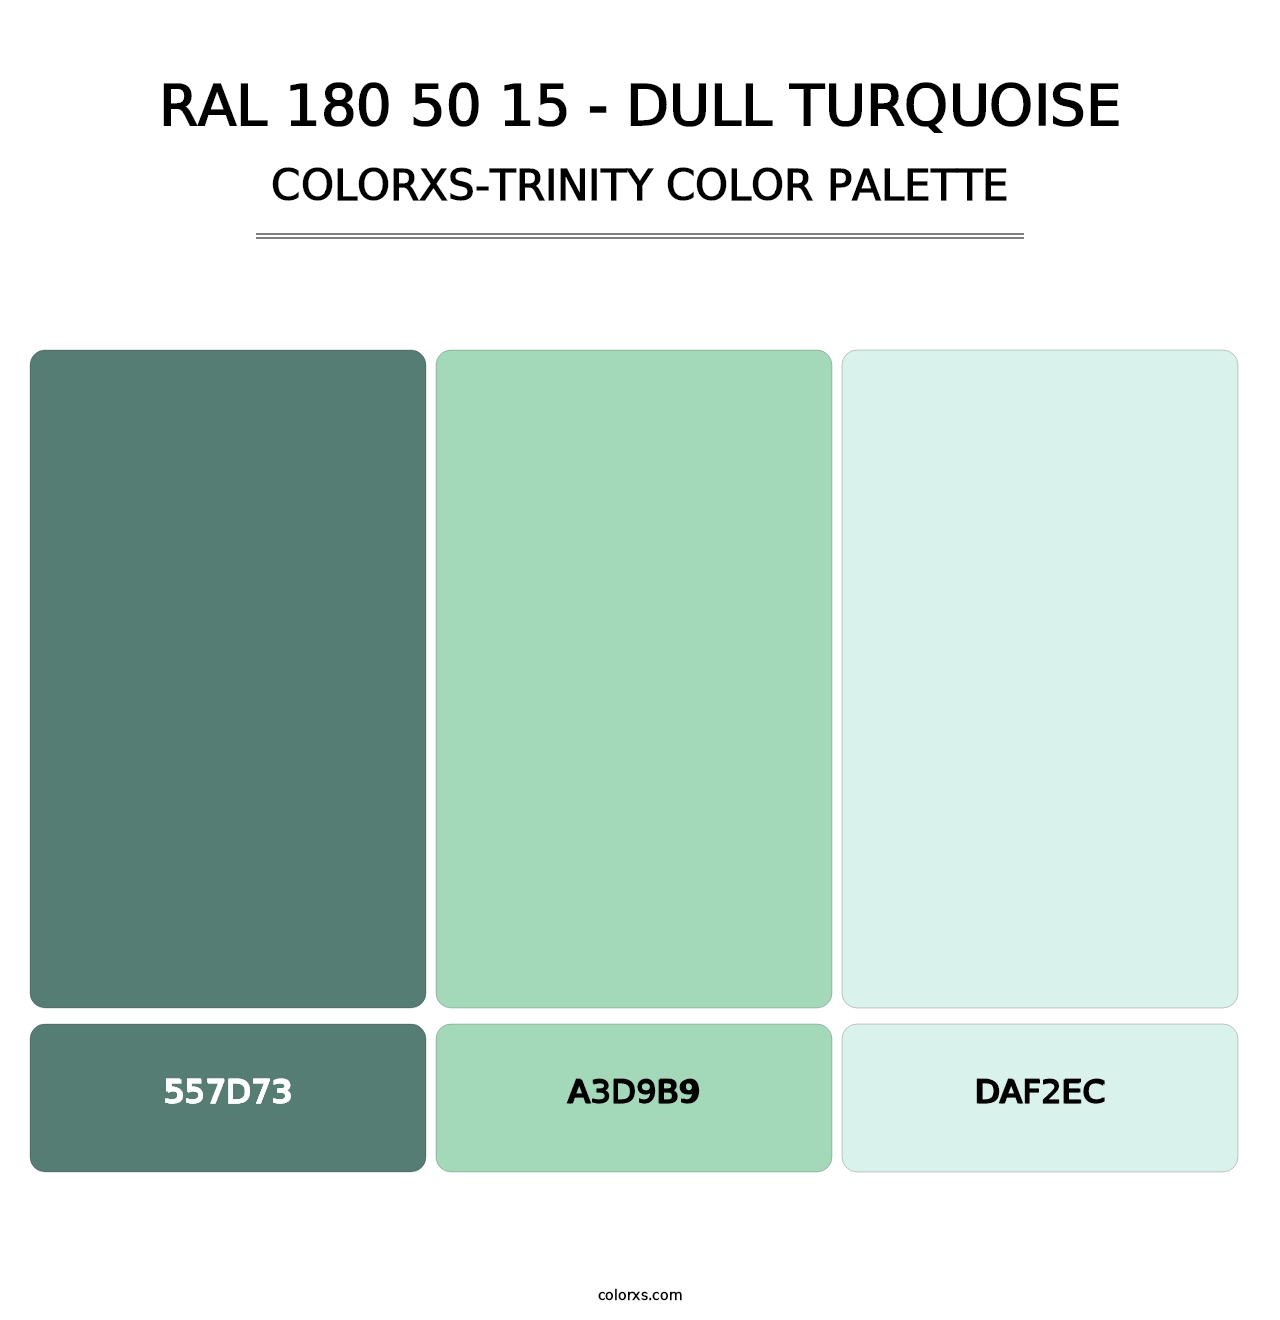 RAL 180 50 15 - Dull Turquoise - Colorxs Trinity Palette